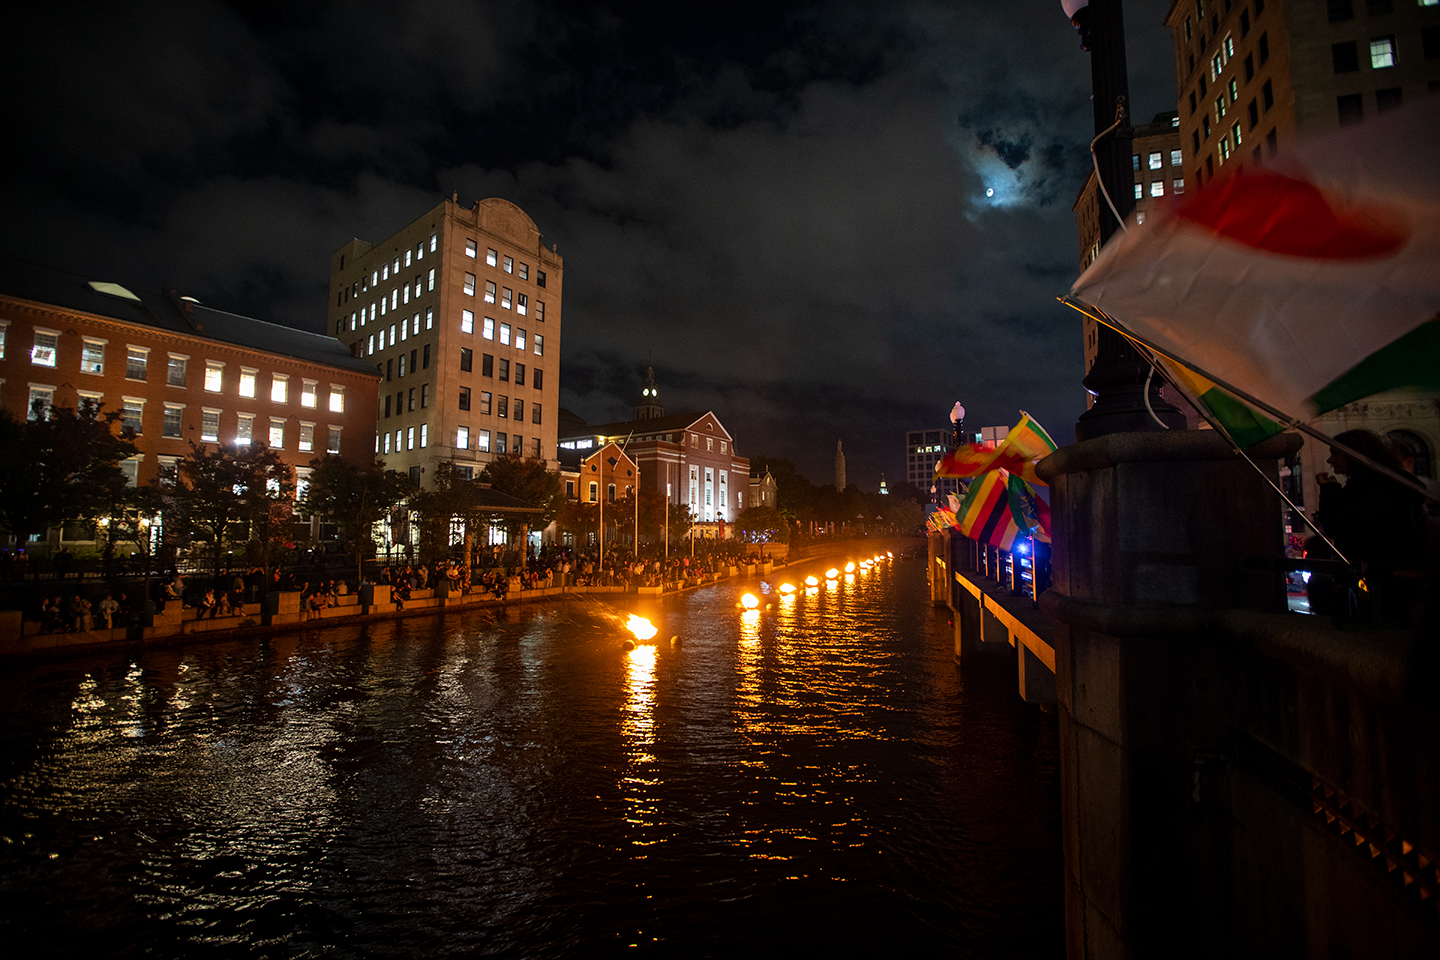 waterfire showing crowds on both shores